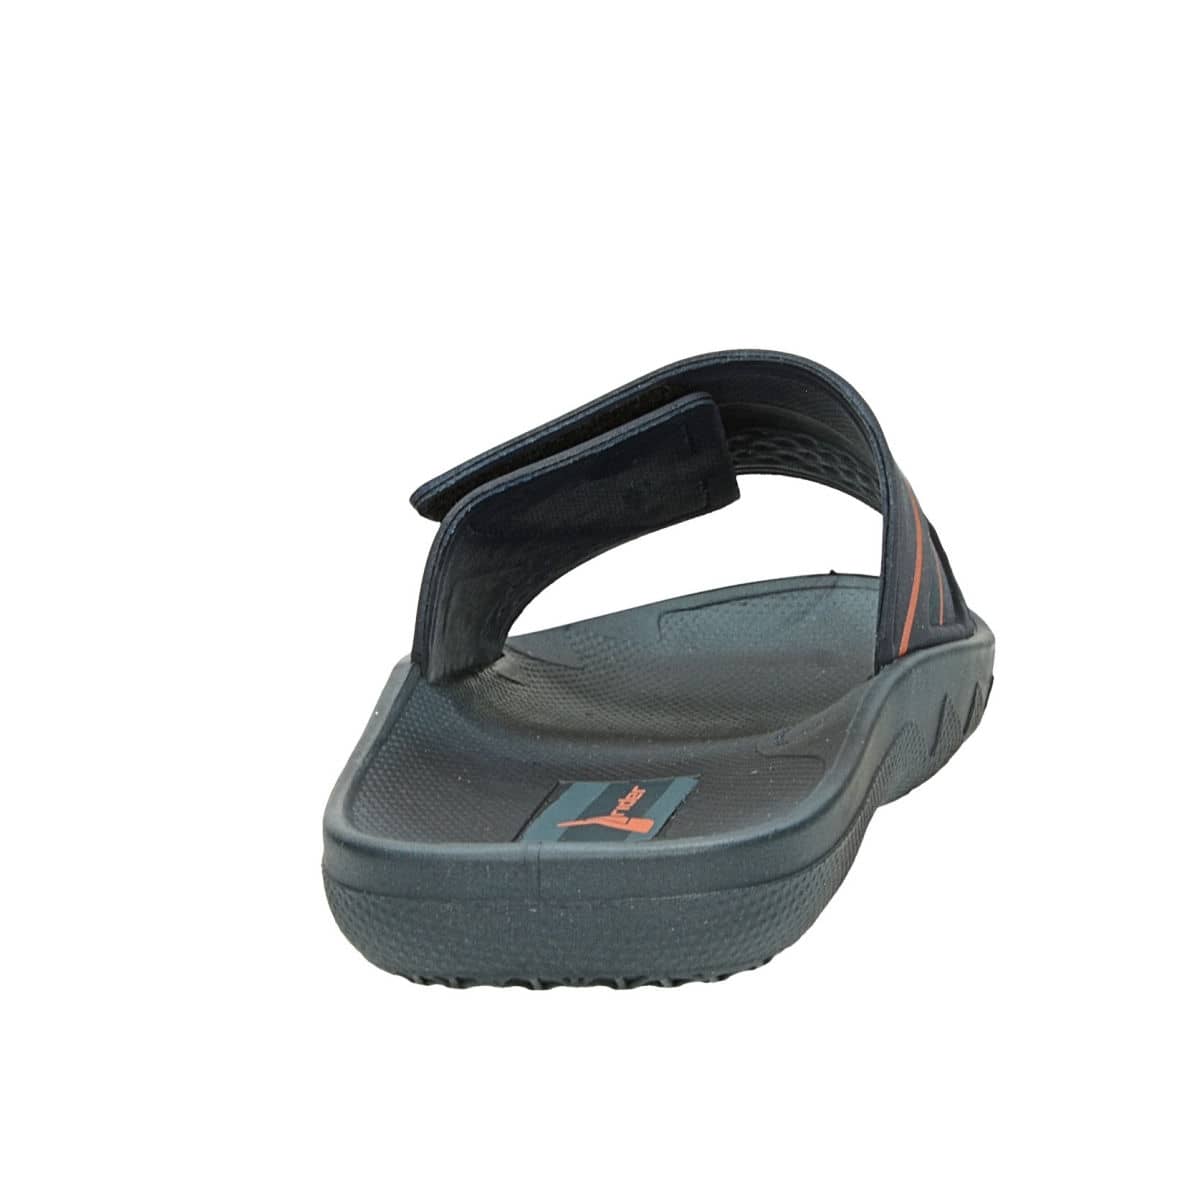 RIDER Slippers - Buy RIDER Slippers Online at Best Price - Shop Online for  Footwears in India | Flipkart.com